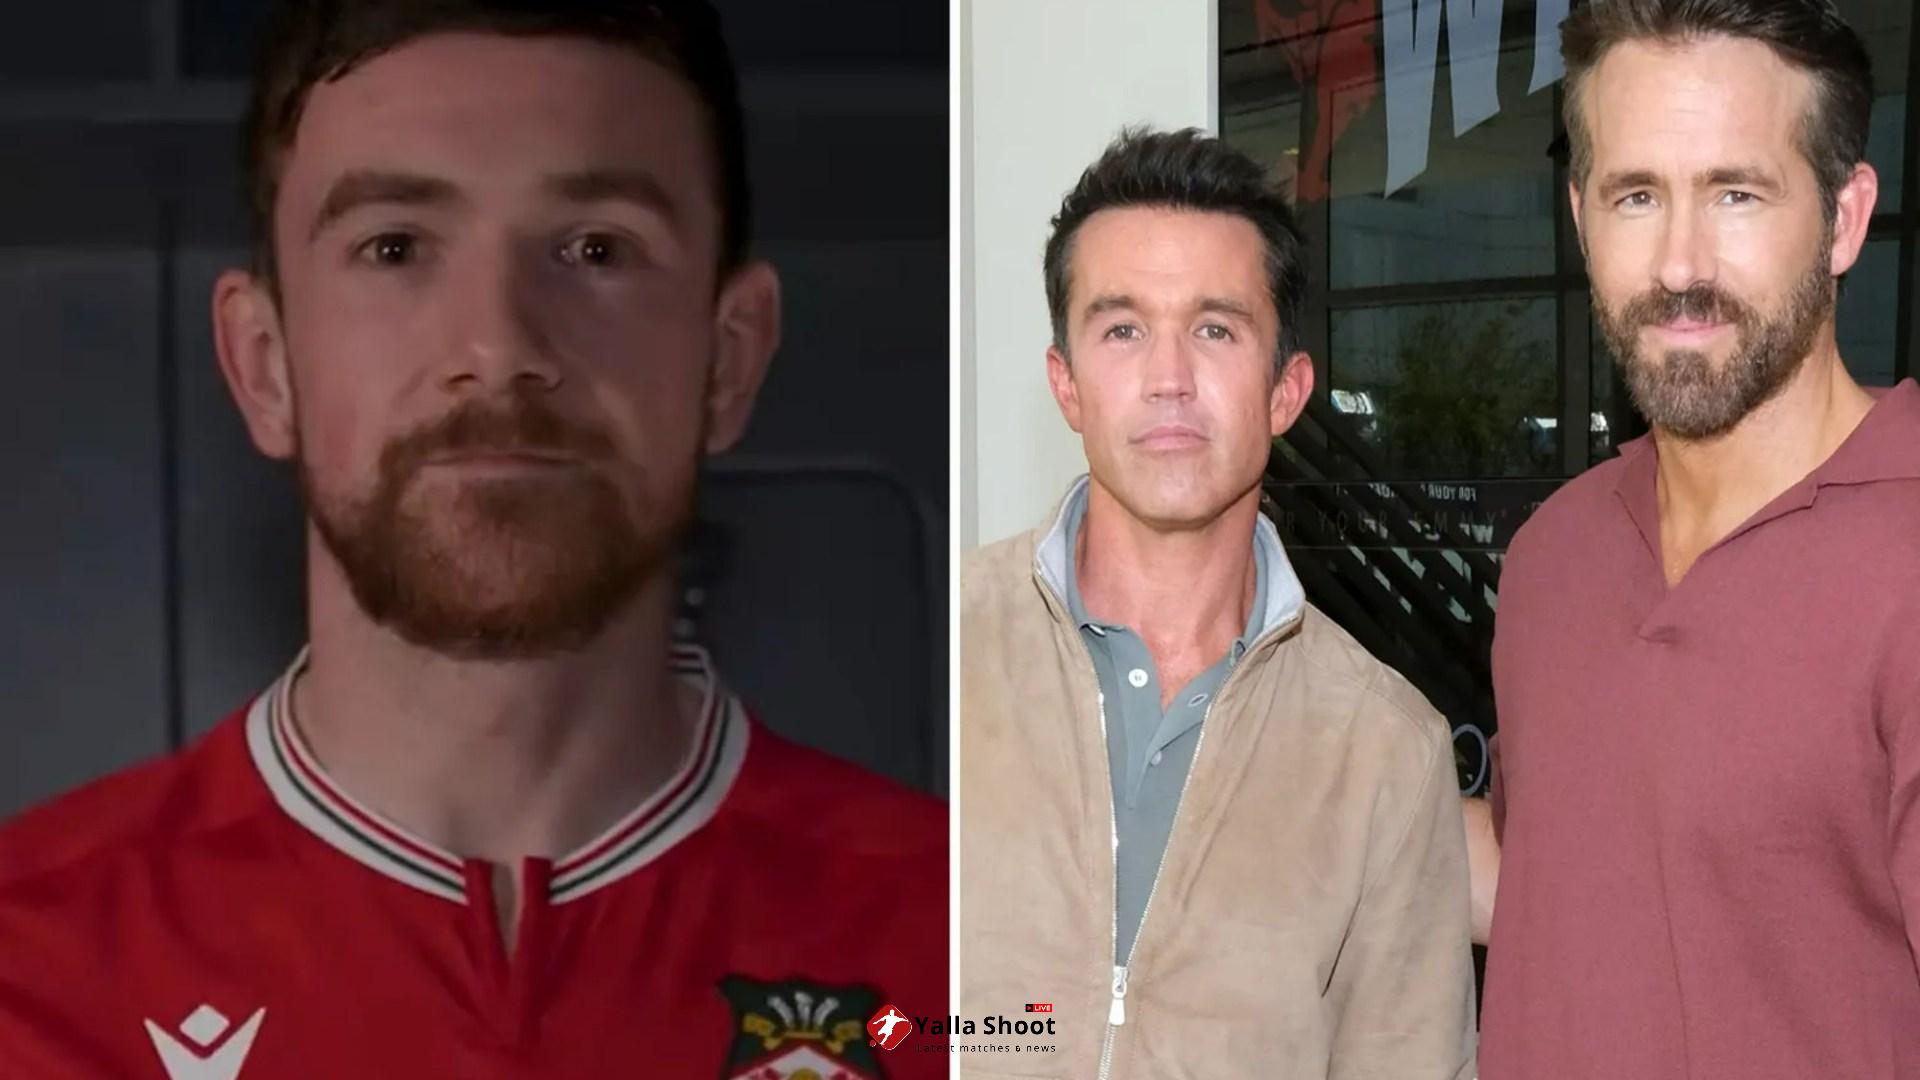 Wrexham announce two transfer Deadline Day signings within 15 minutes as Ryan Reynolds & Rob McElhenney splash cash